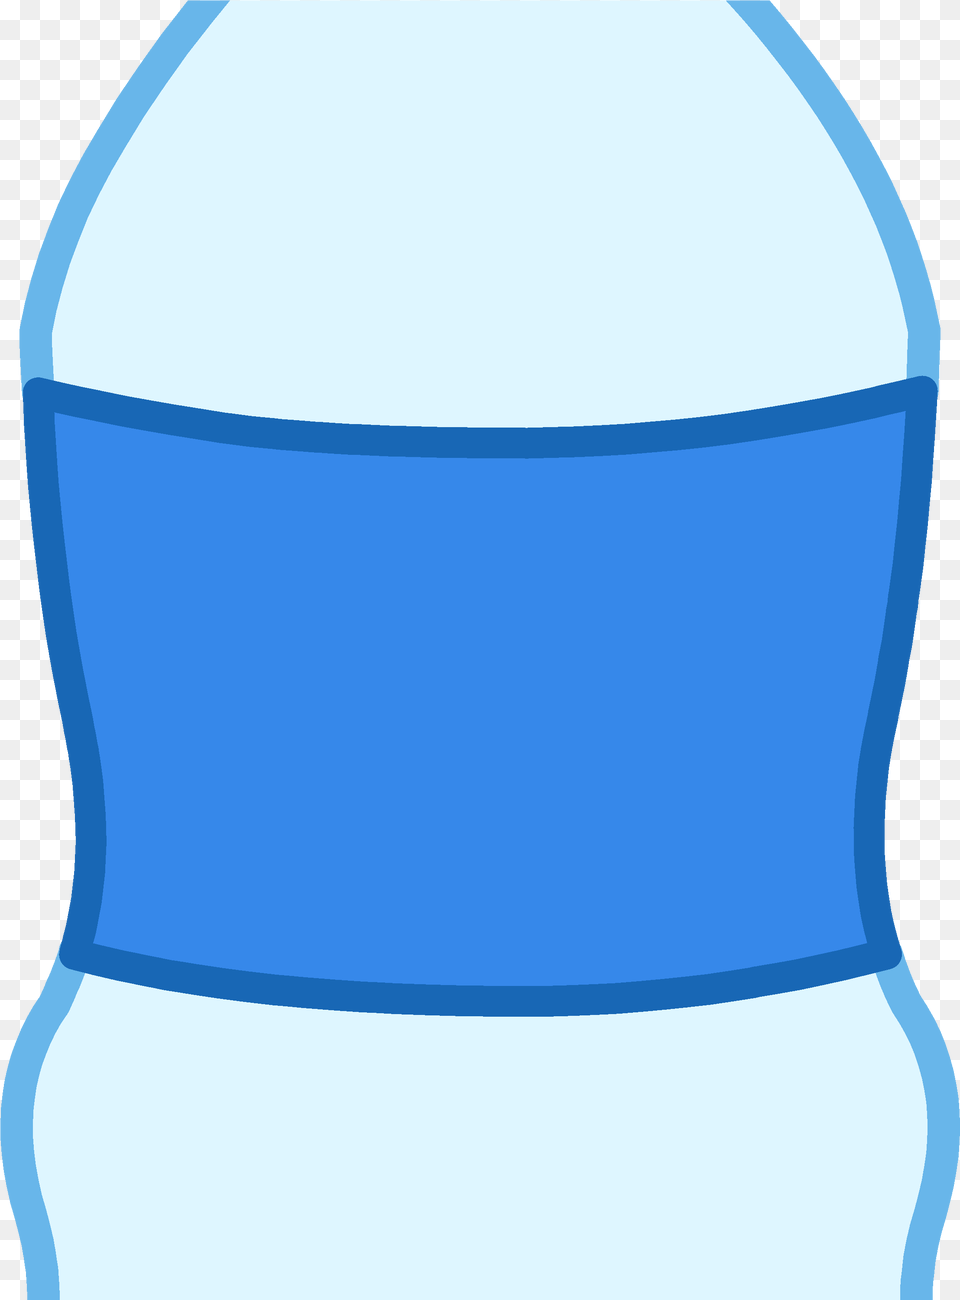 Beautiful Water Bottles Clipart Bottled Water Clipart Transparent, Bottle, Water Bottle, Beverage, Mineral Water Png Image